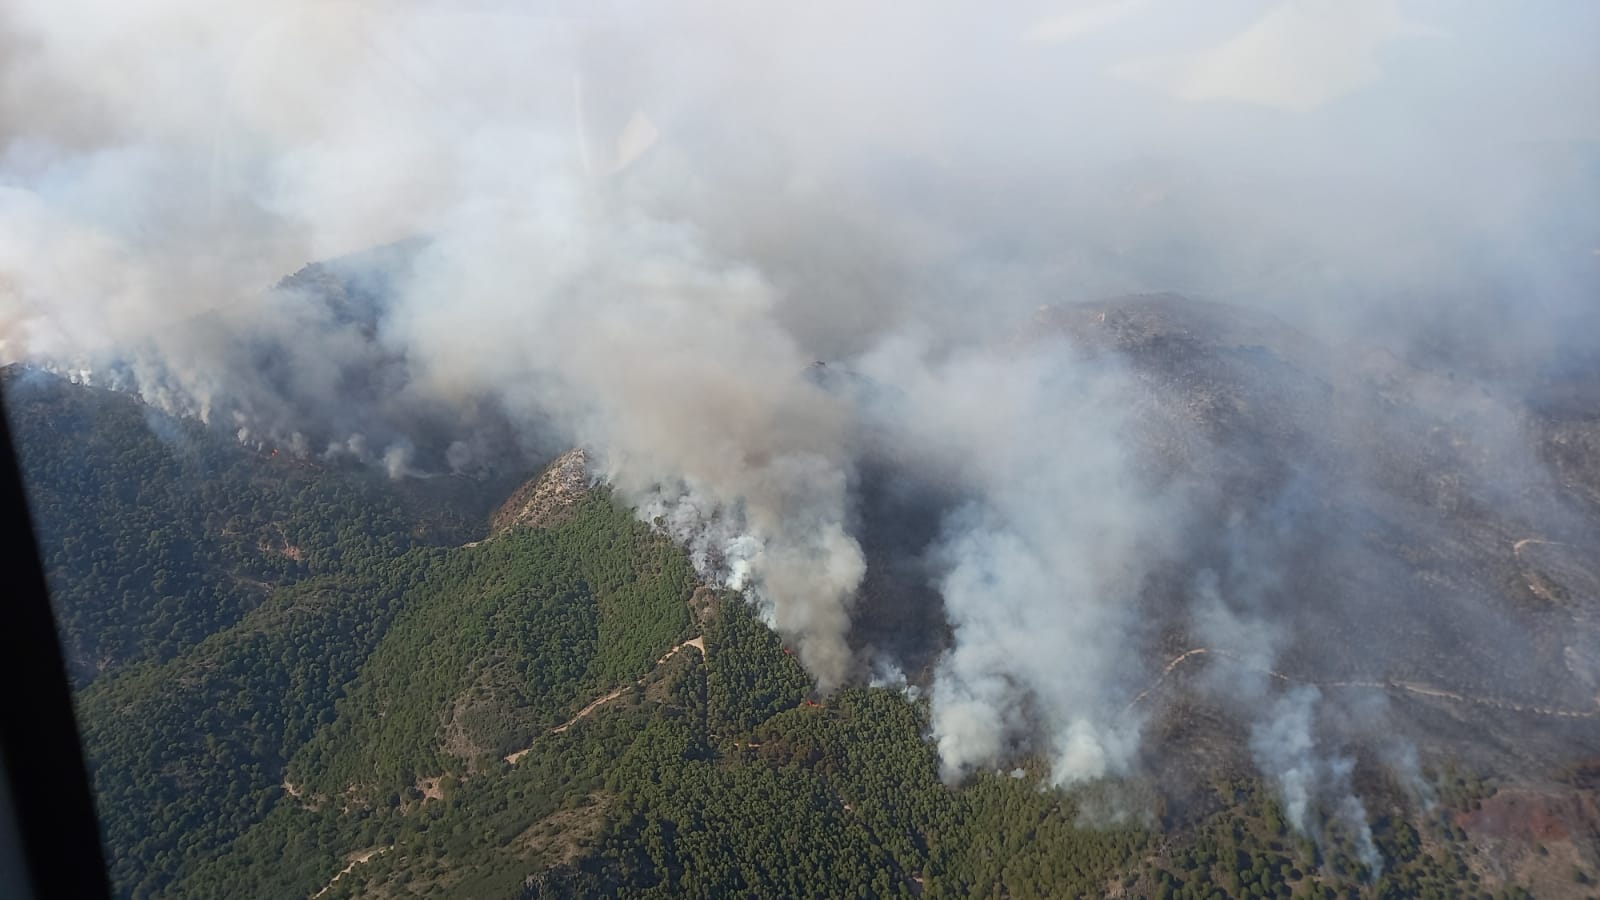 Photograph of the Alhaurín el Grande fire, as seen from the air.